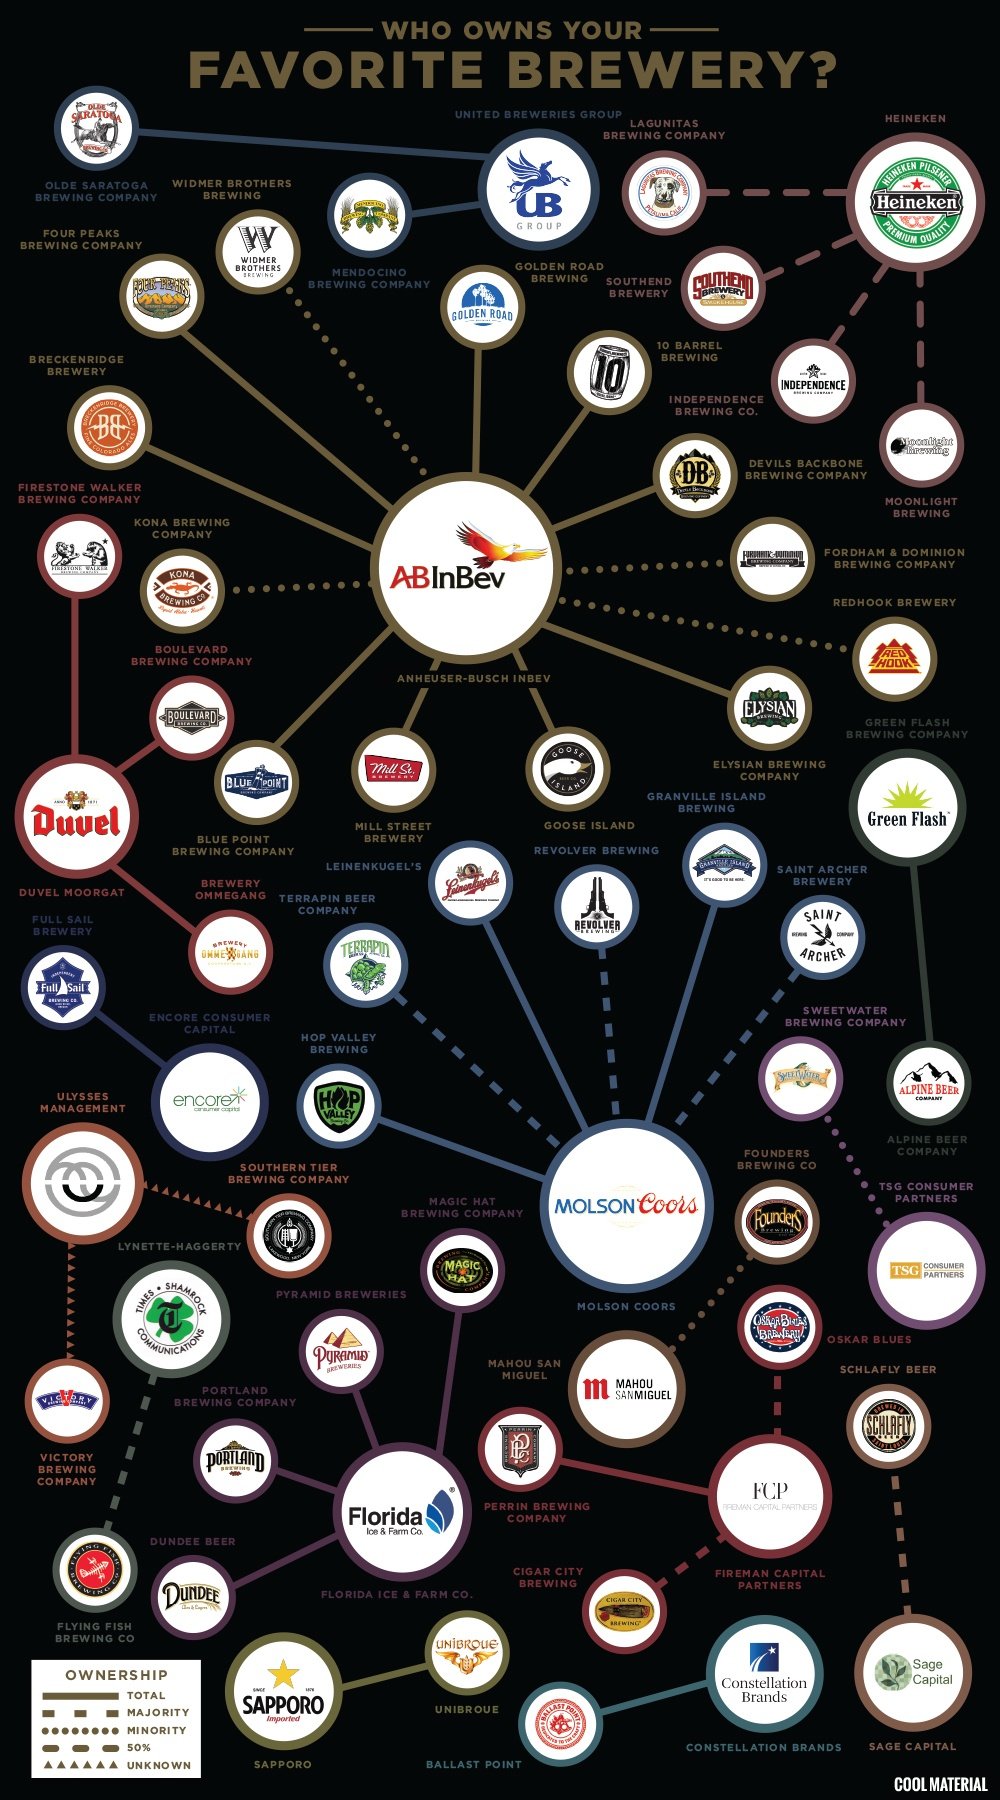 Who Owns Your Favorite Brewery?